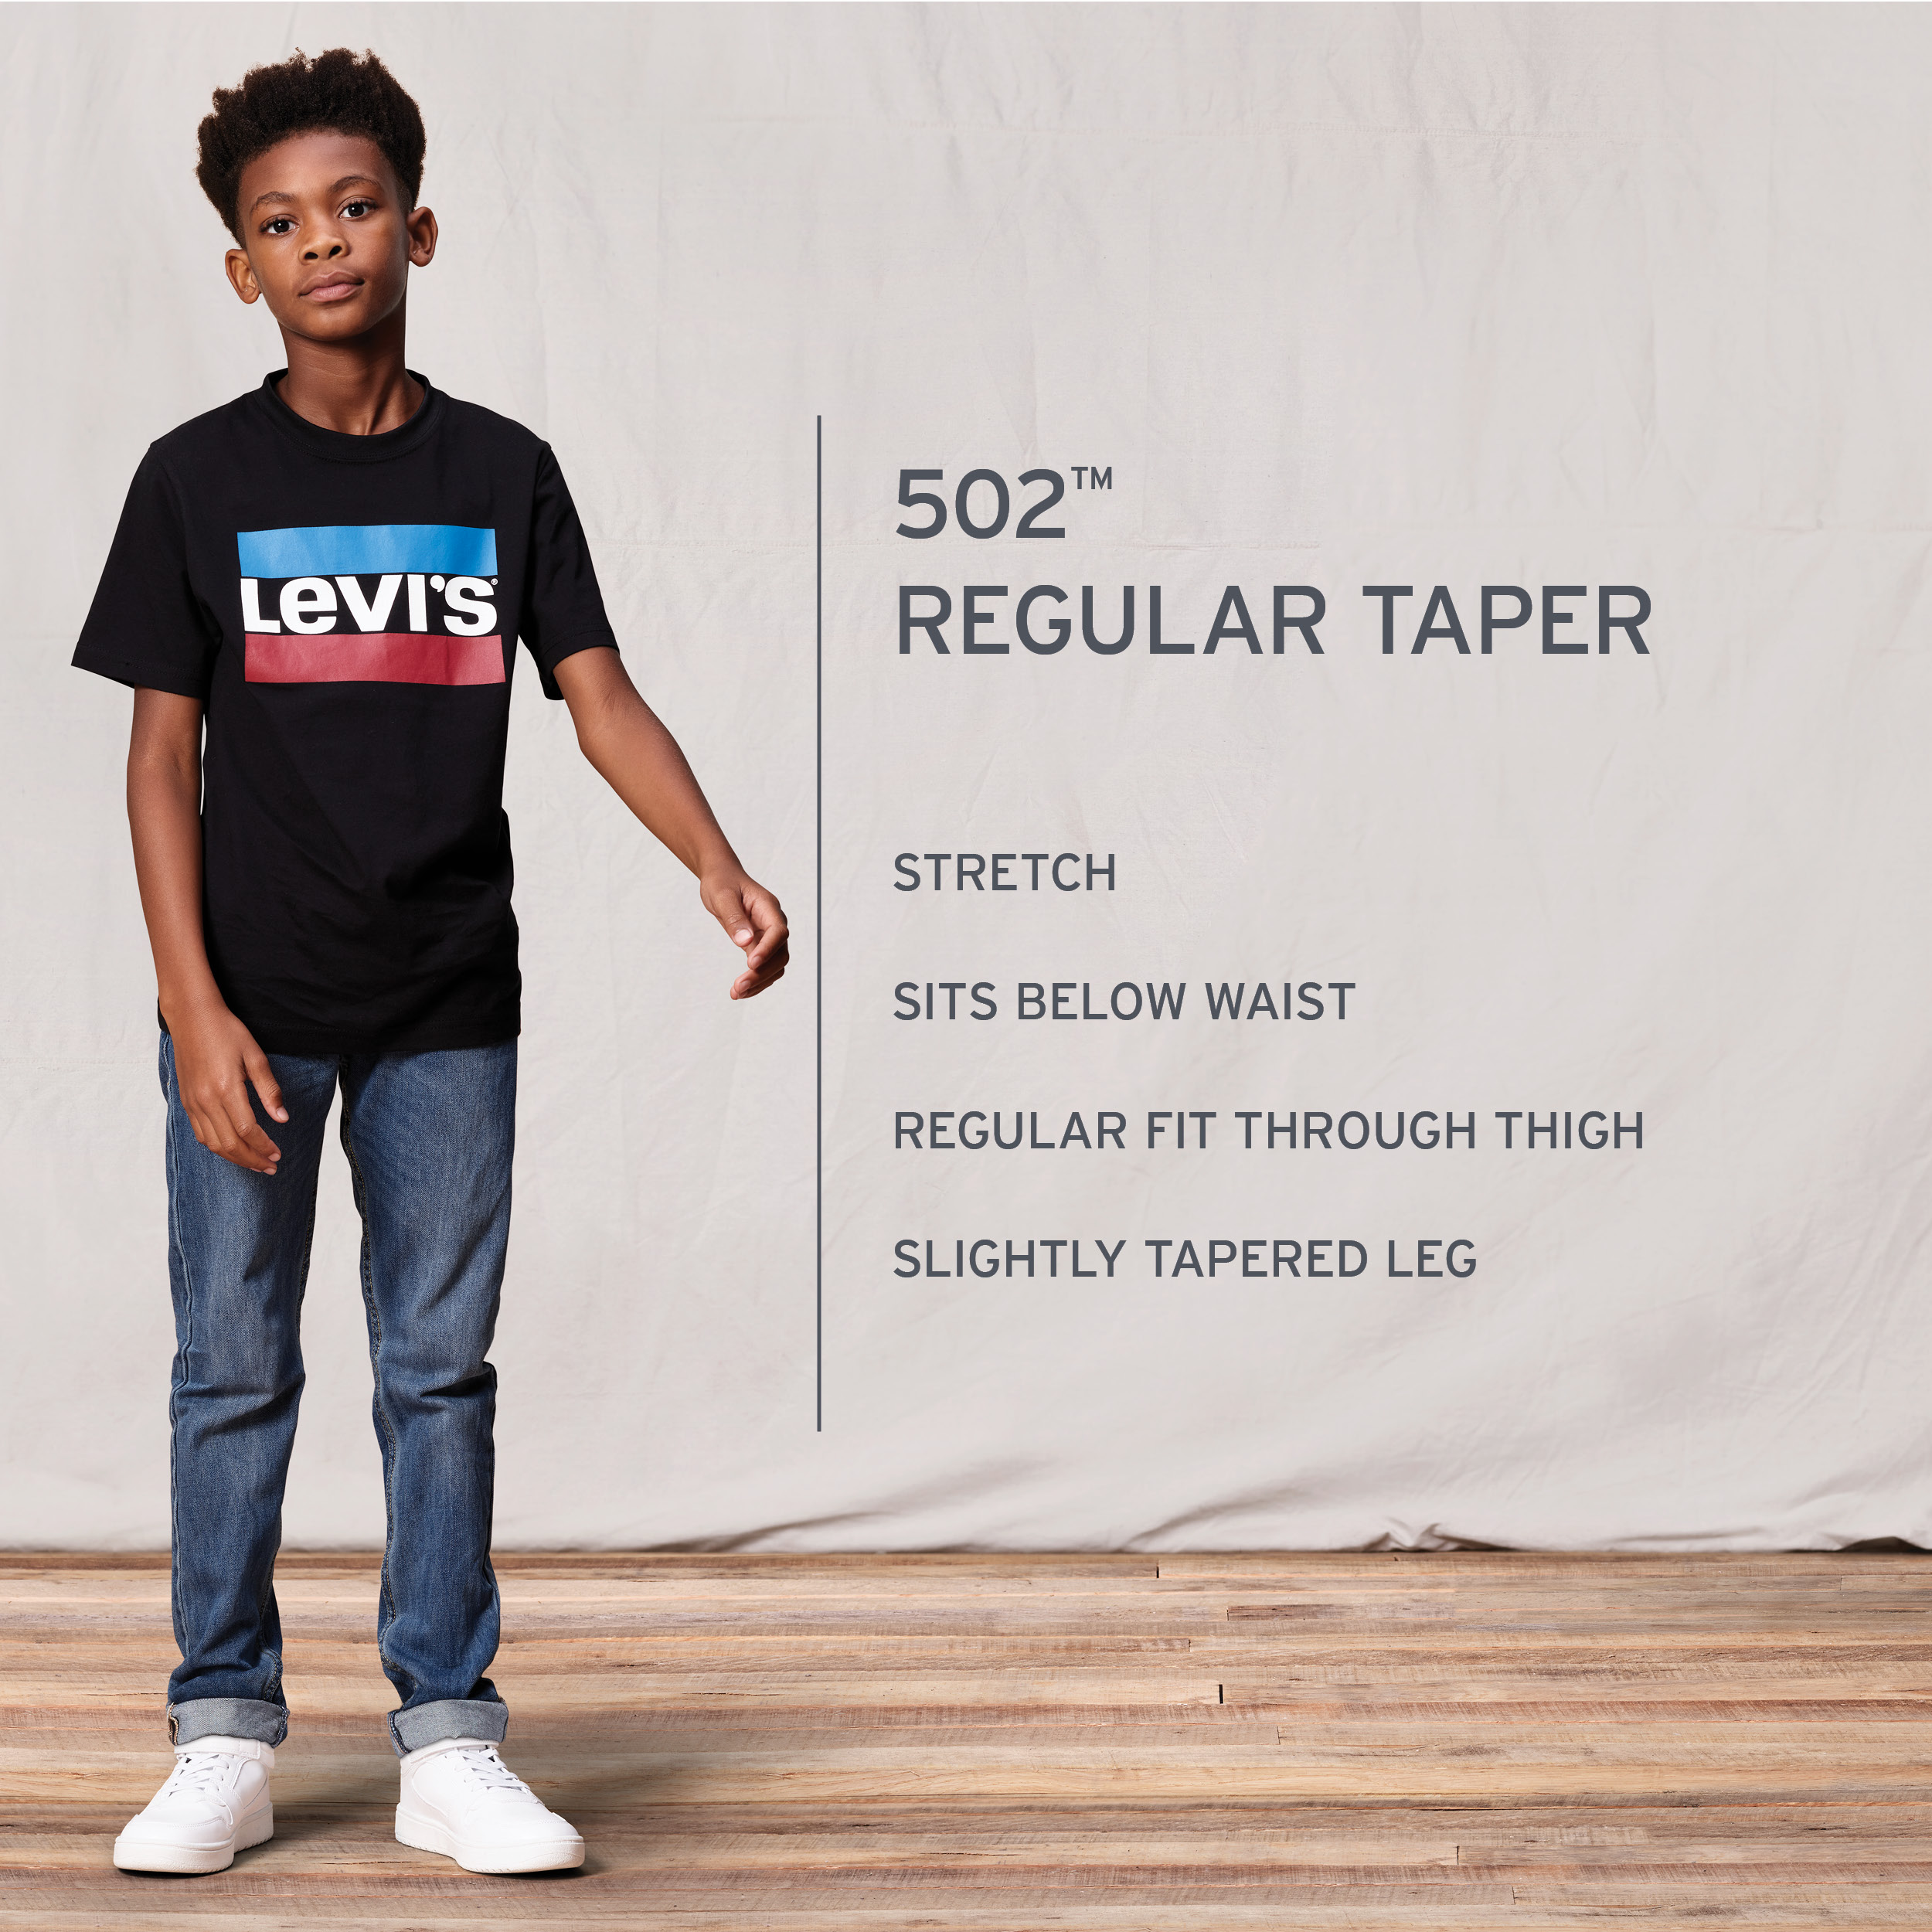 Levi's Boys' 502 Regular Taper Fit Performance Jeans, Sizes 4-20 - image 3 of 11